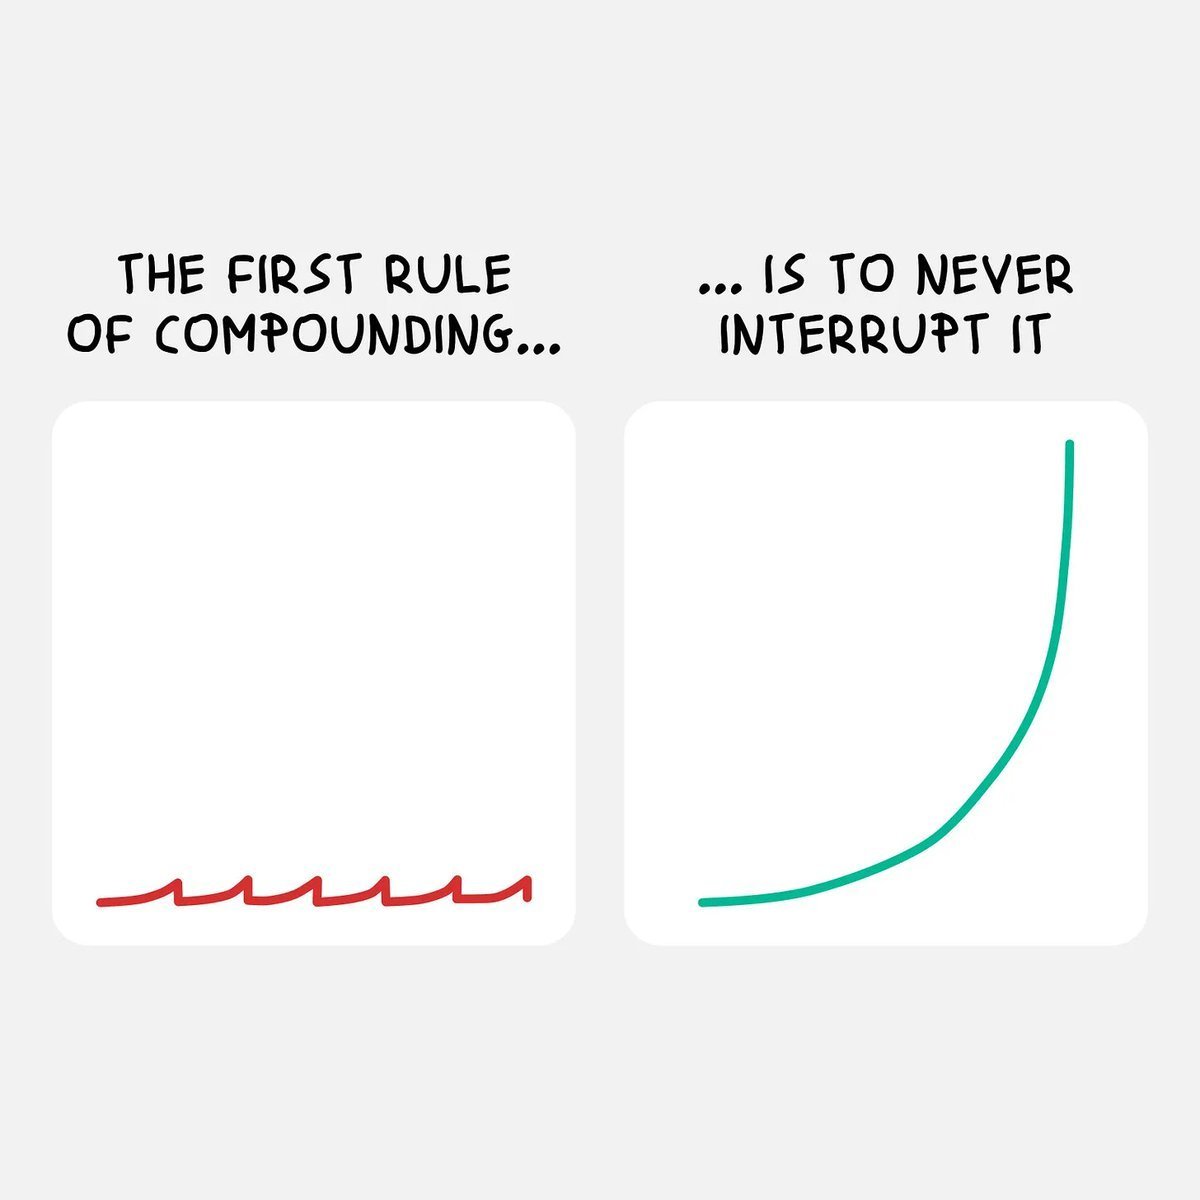 @FoundersPodcast @naval 5. “The first rule of compounding is to never interrupt it unnecessarily.” – Charlie Munger